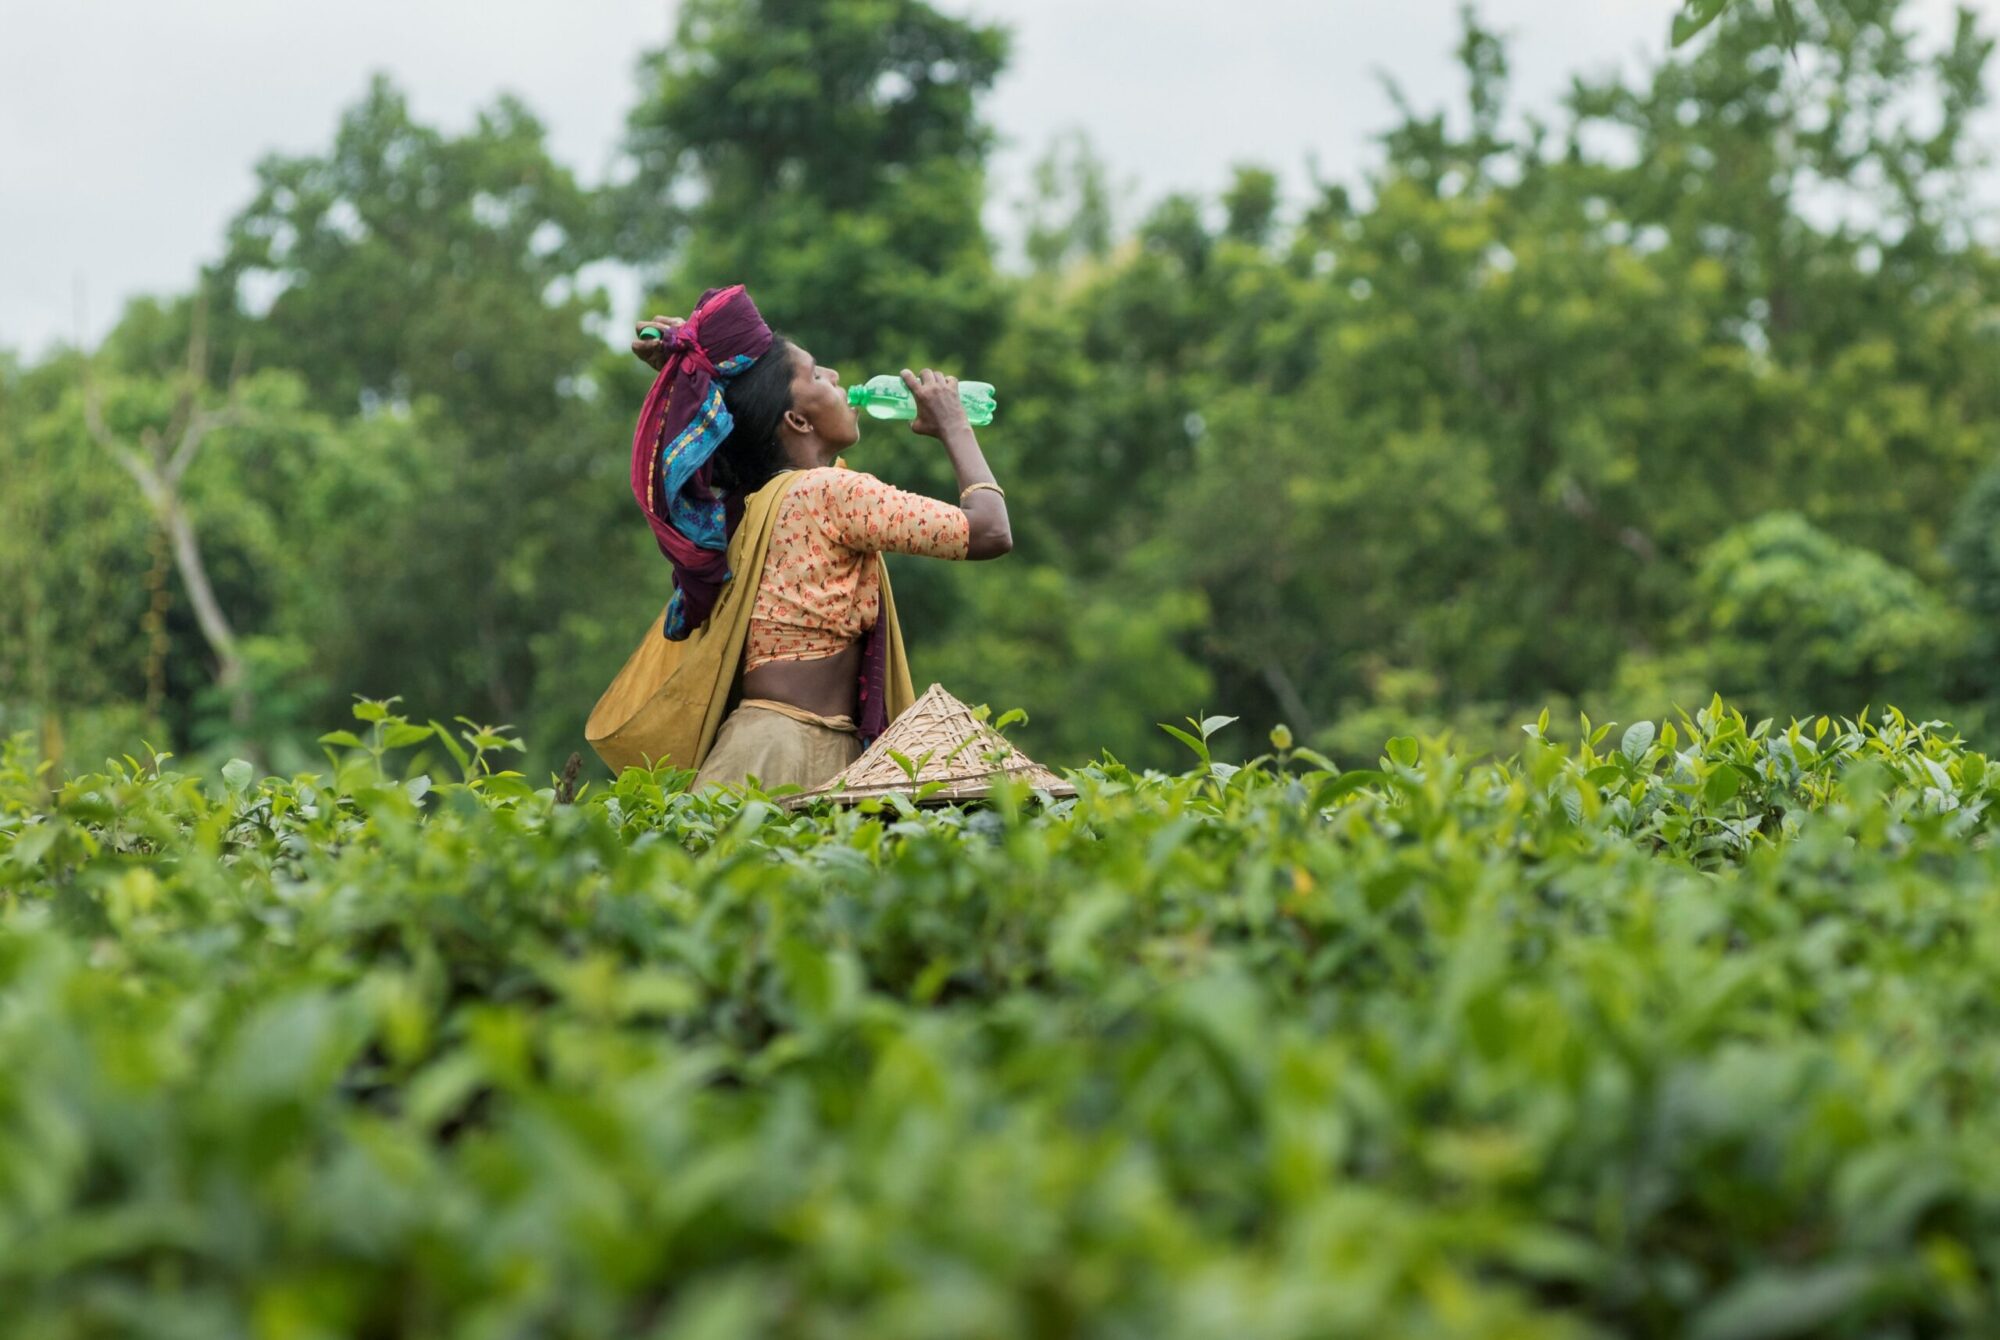 ‘The Weight of the Heat’: Climate Change Further Burdens Bangladesh Tea Workers